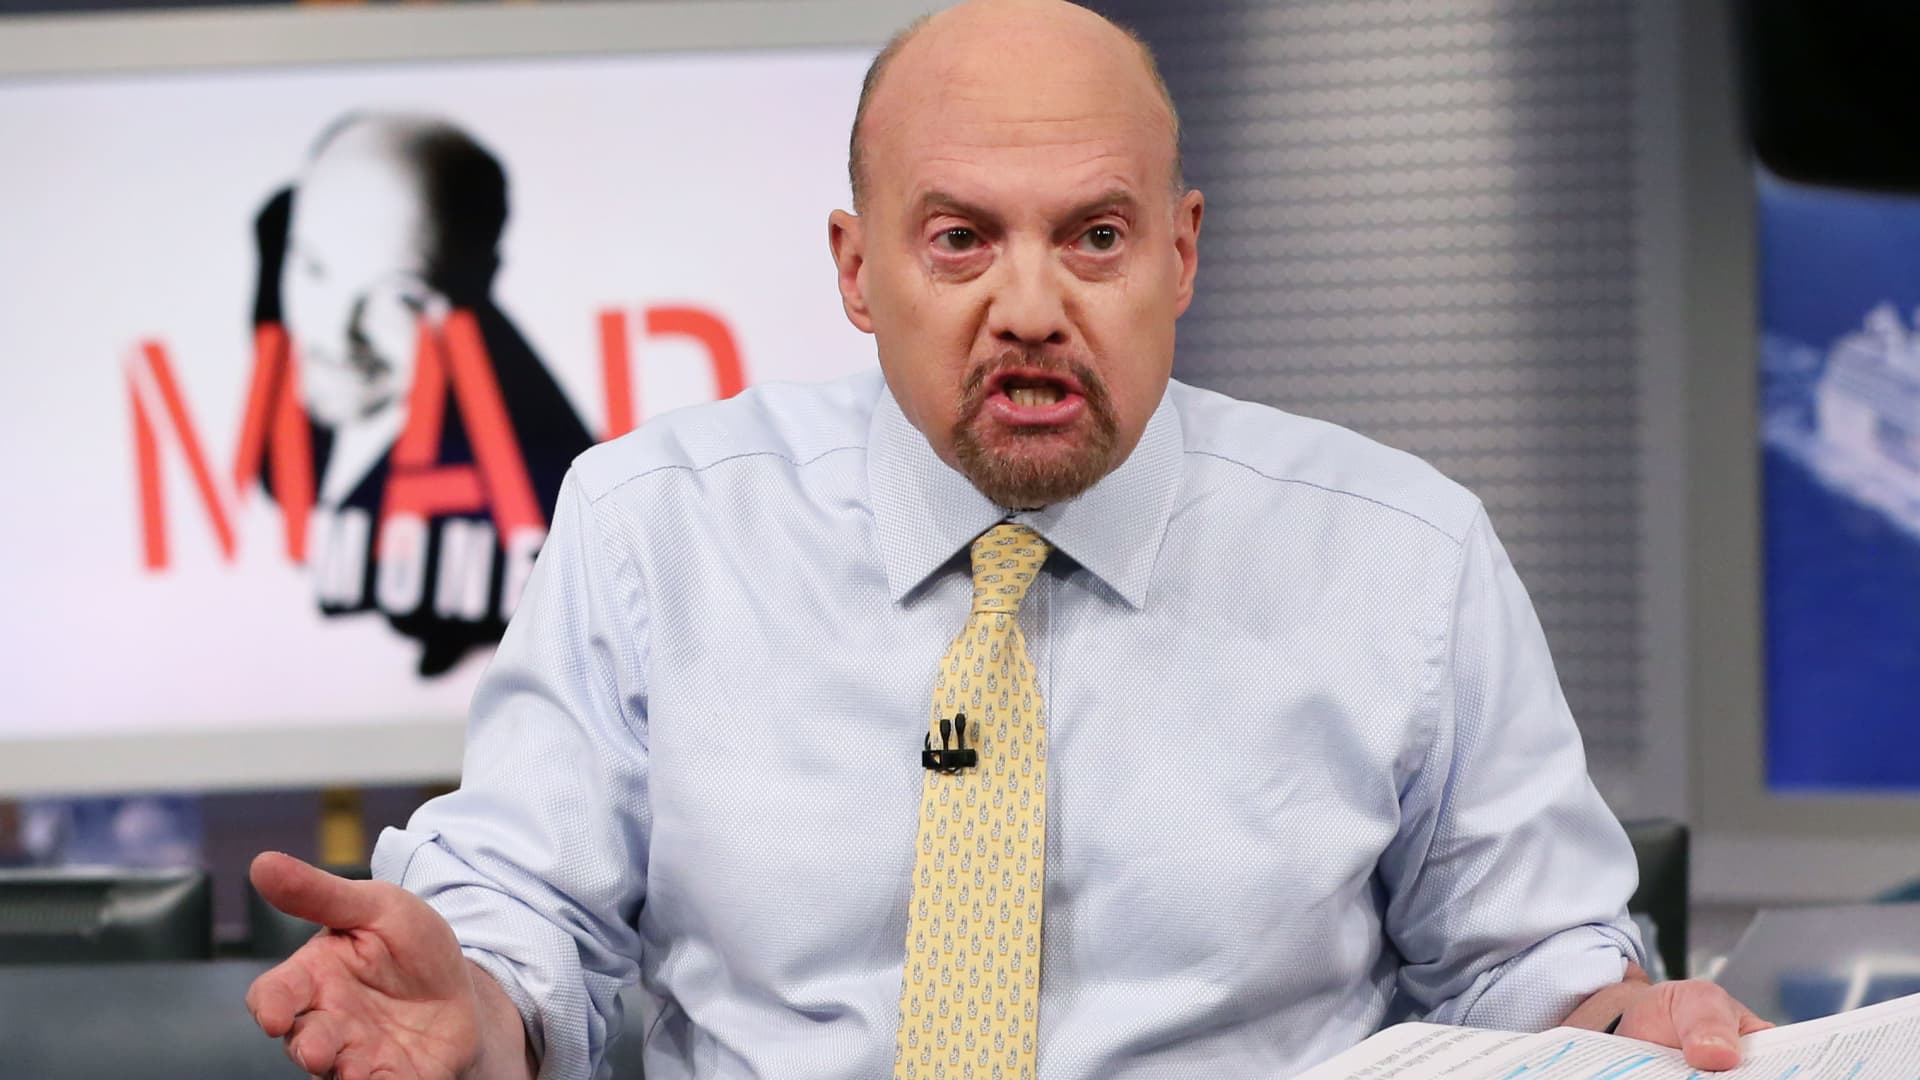 Jim Cramer says a drop in oil prices could signal the start of a market rally